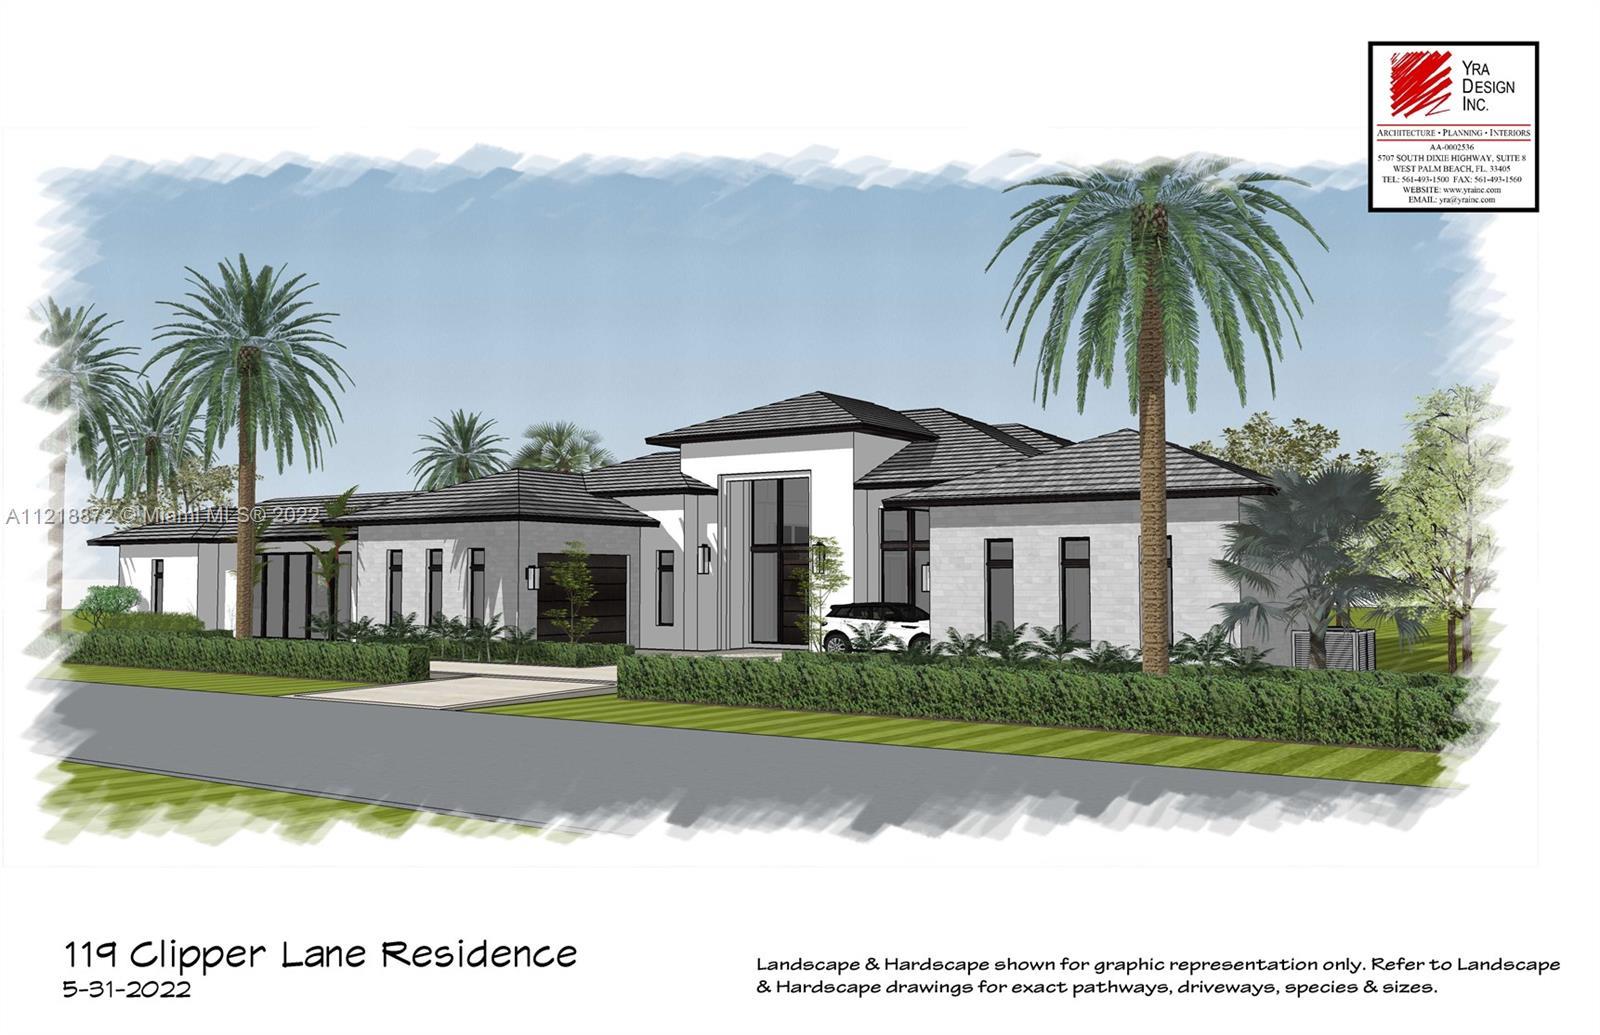 New Construction – Premier Golf Course Lot in Admirals Cove
This single-story compound 4 bedroom, 4